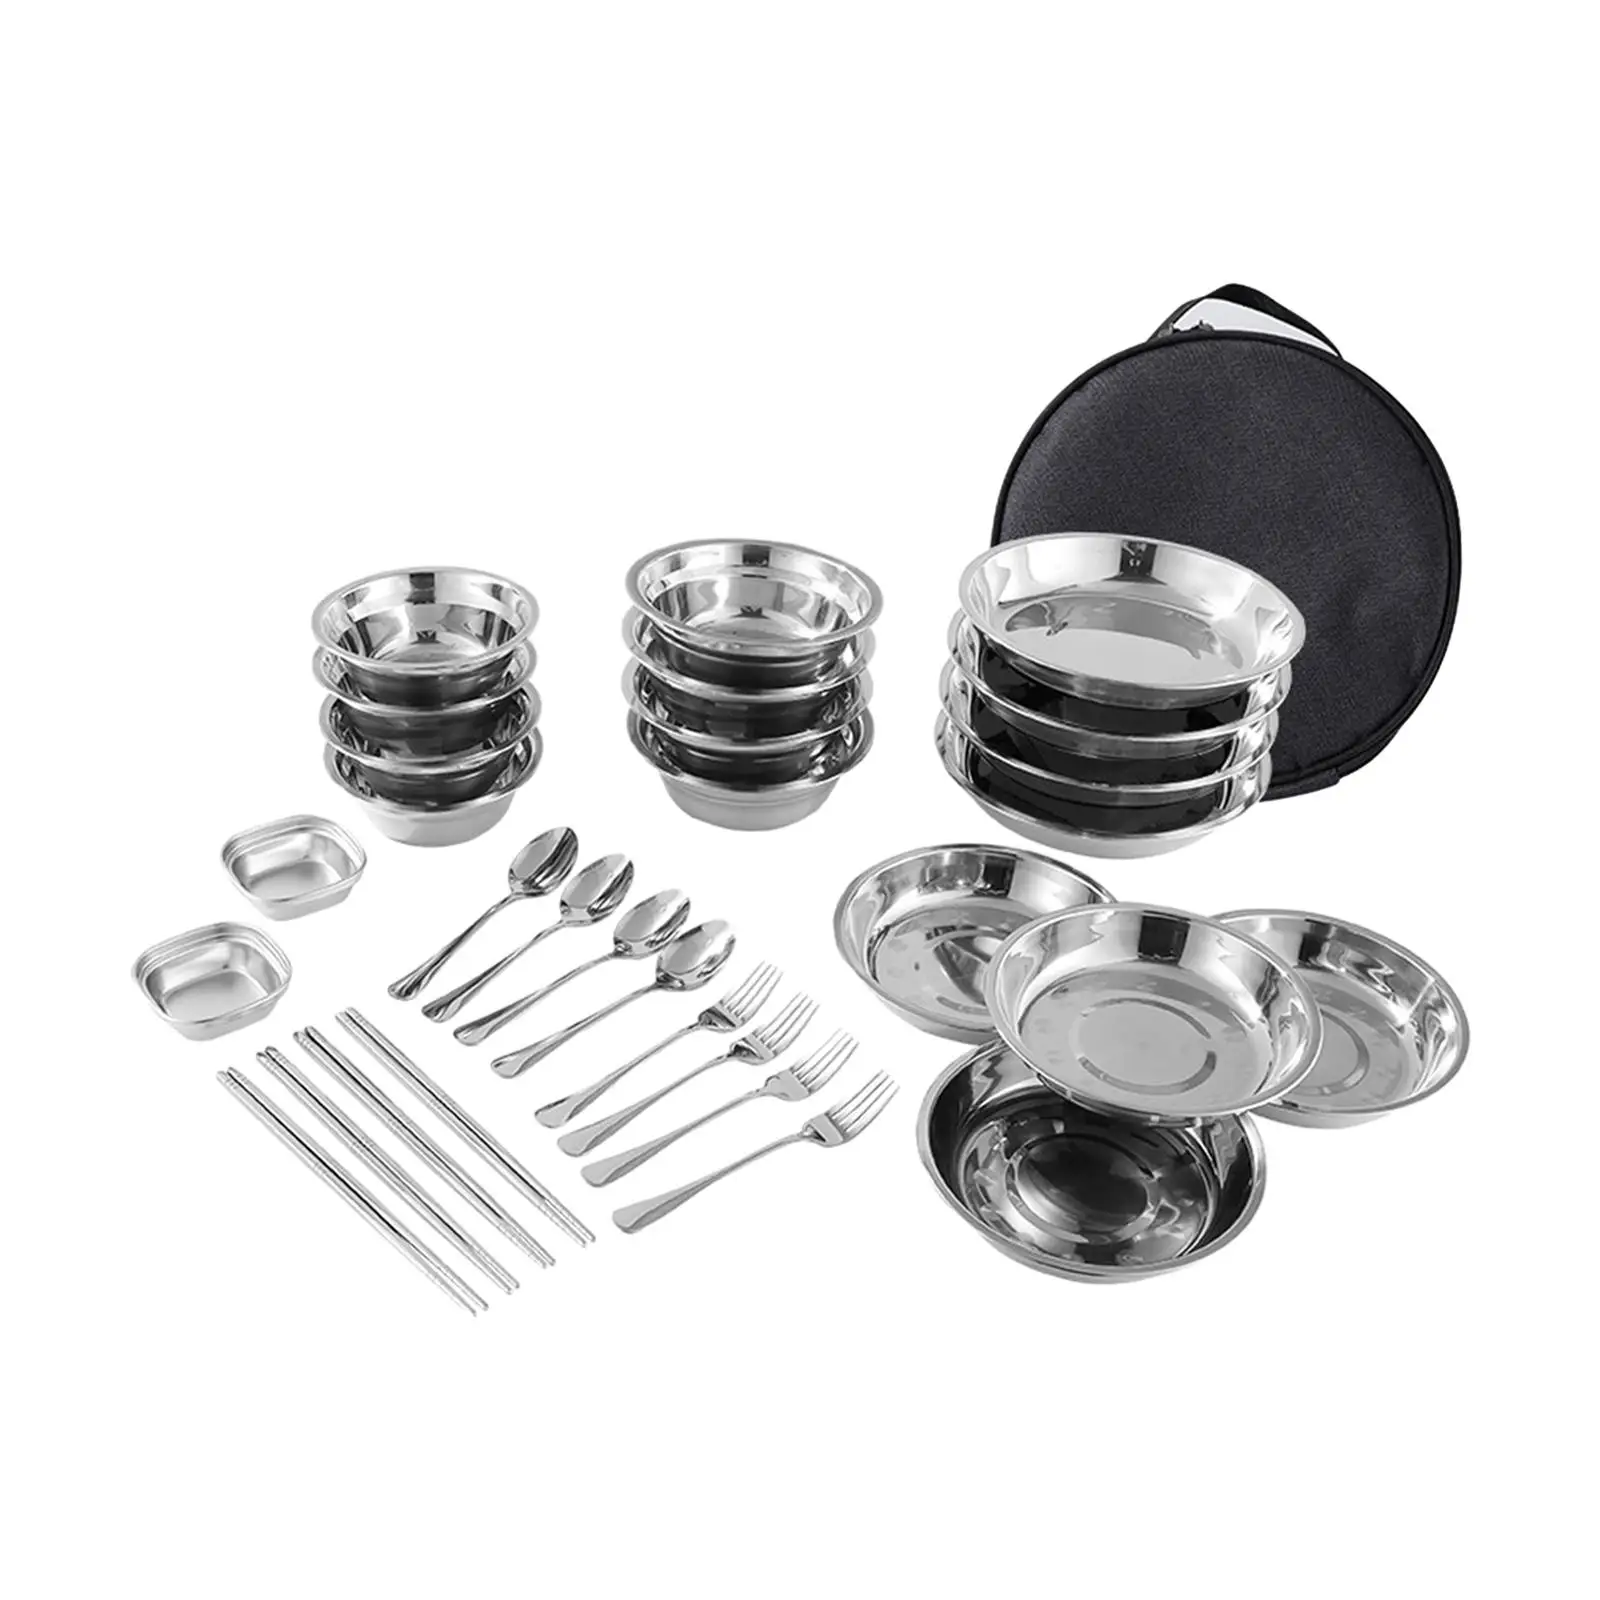 Stainless Steel Plates and Bowls Reusable for Backpacking Beach Picnic